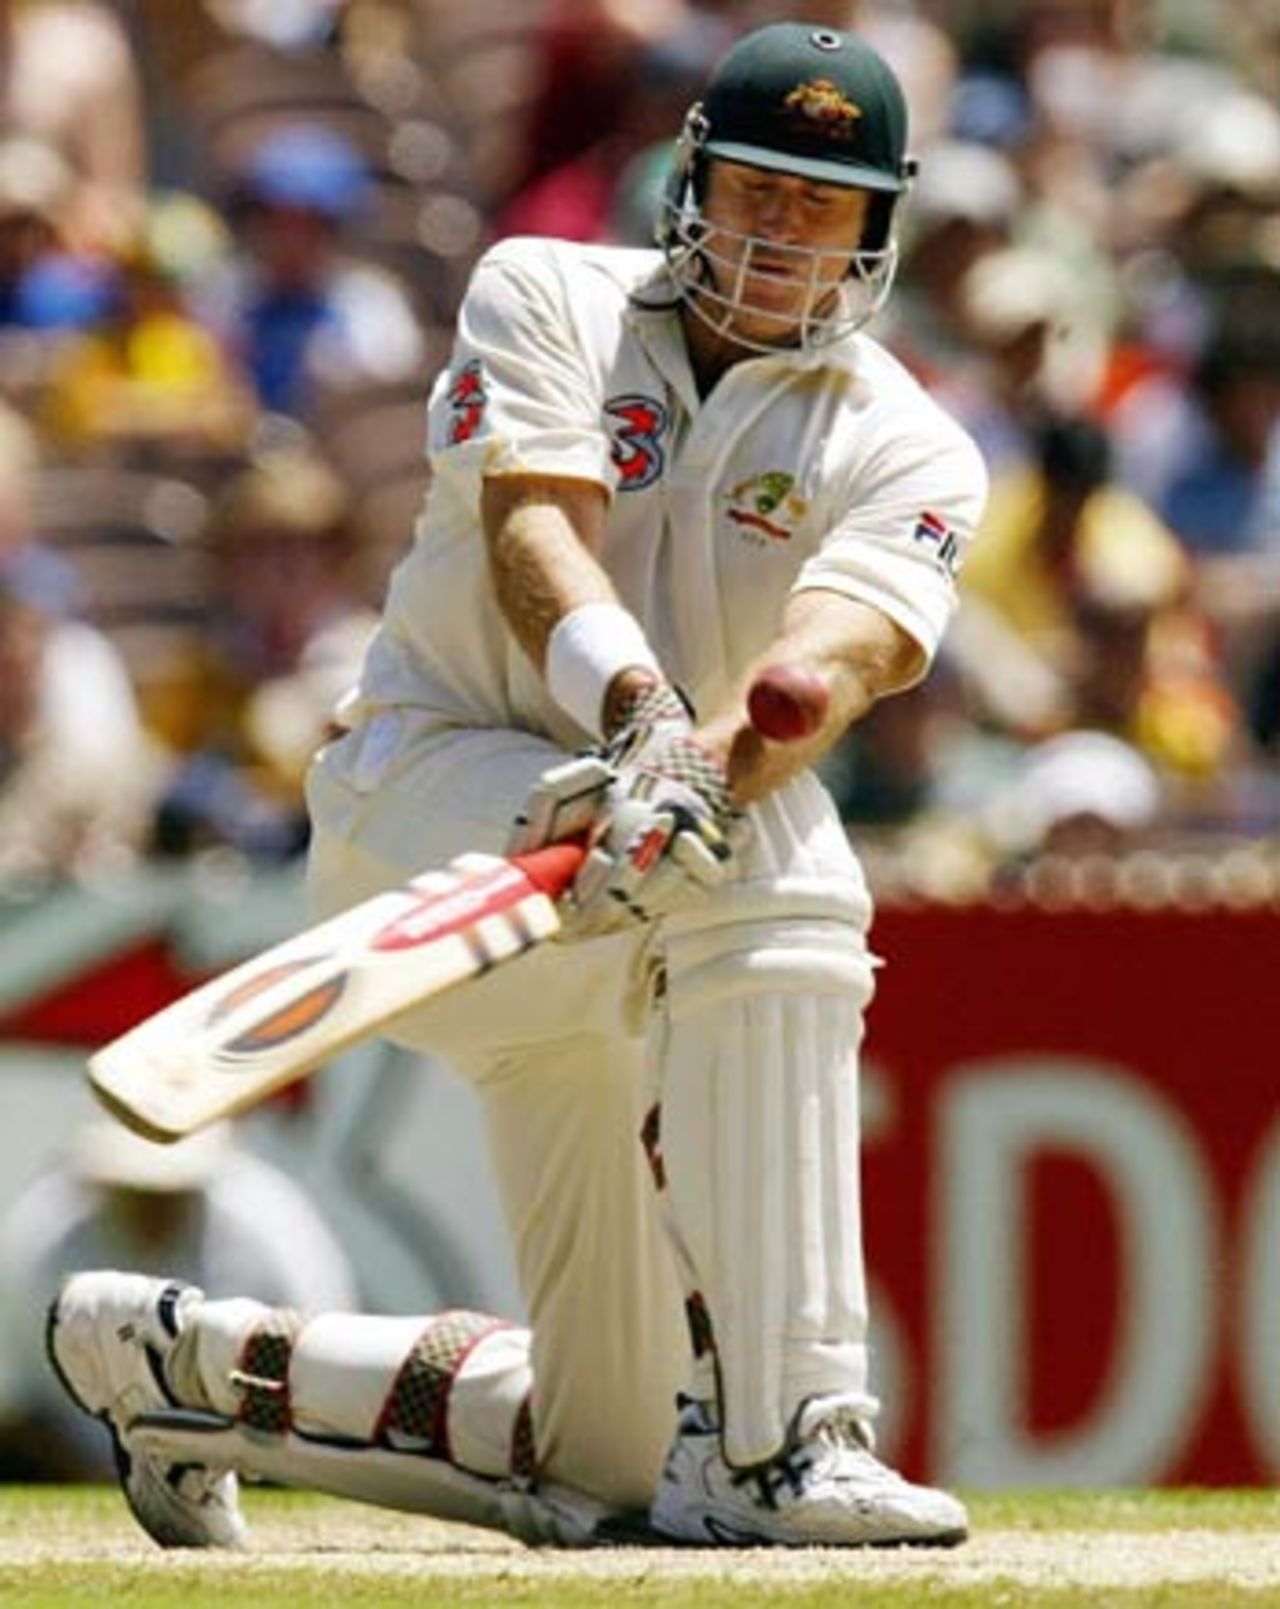 Matthew Hayden swats the ball away with his eyes closed, Australia v India, 3rd Test, Melbourne, 5th day, December 30, 2003